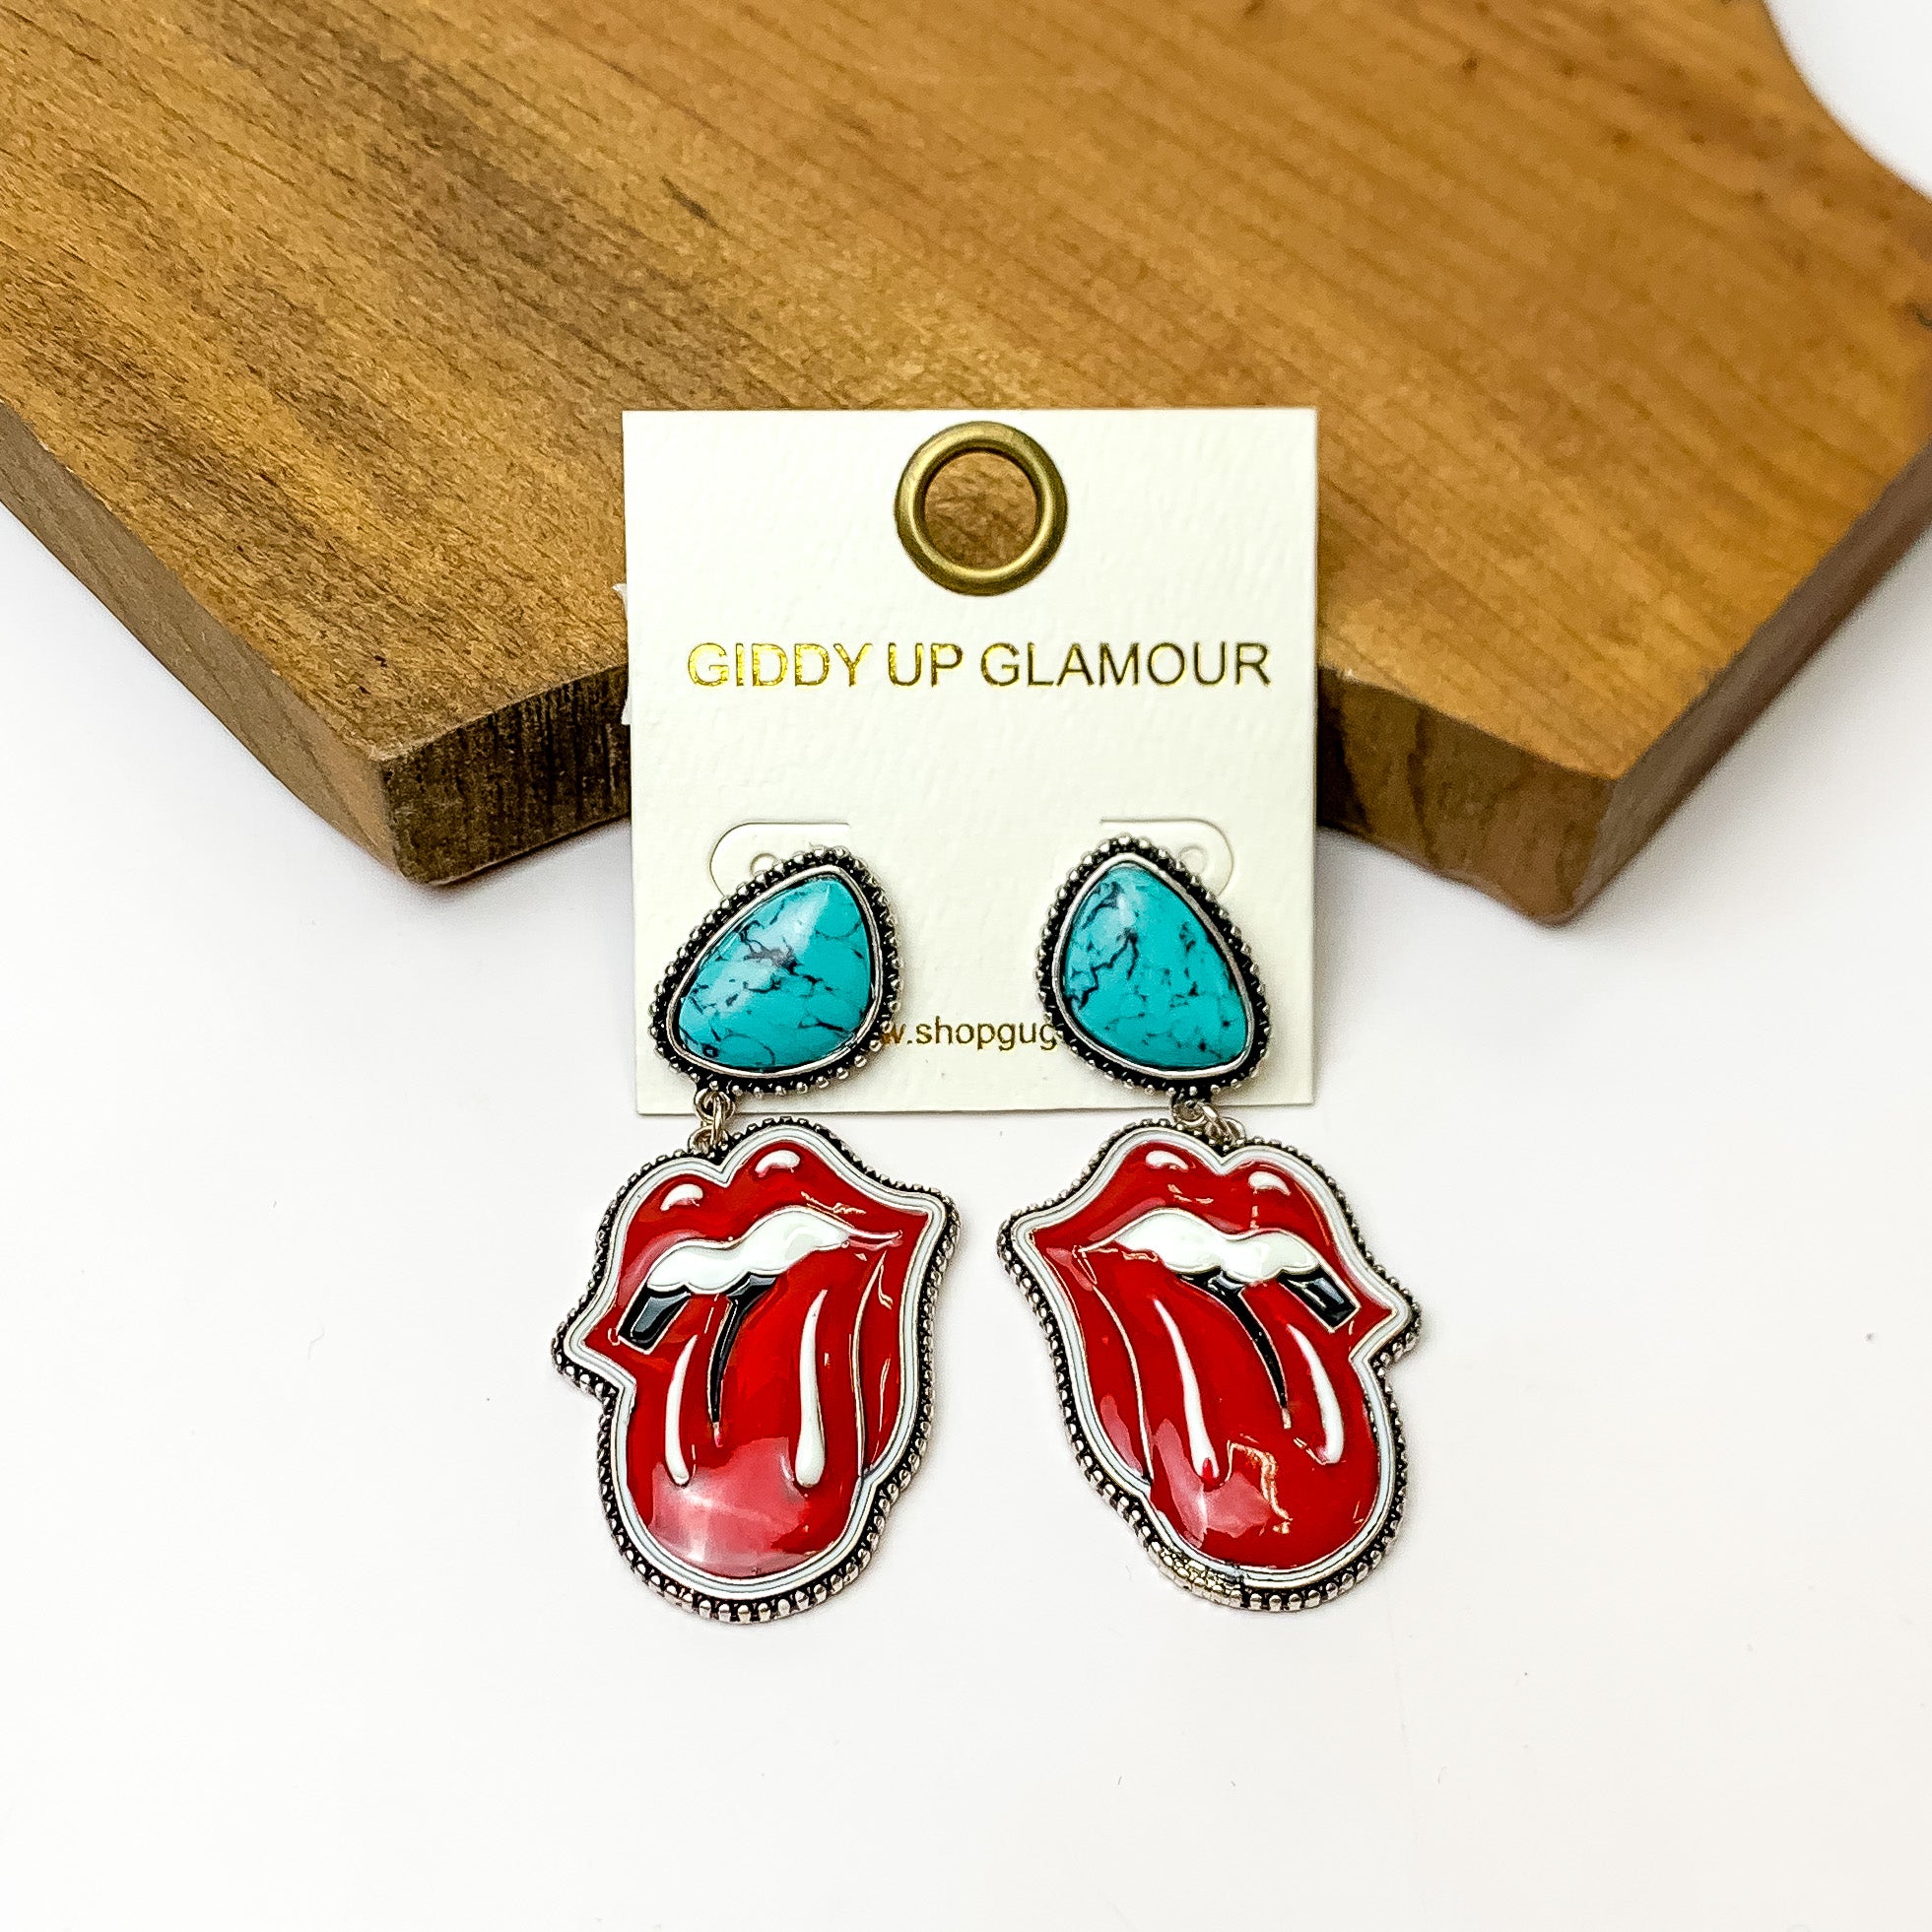 Faux Turquoise Post Earrings with Lip and Tongue Drop - Giddy Up Glamour Boutique